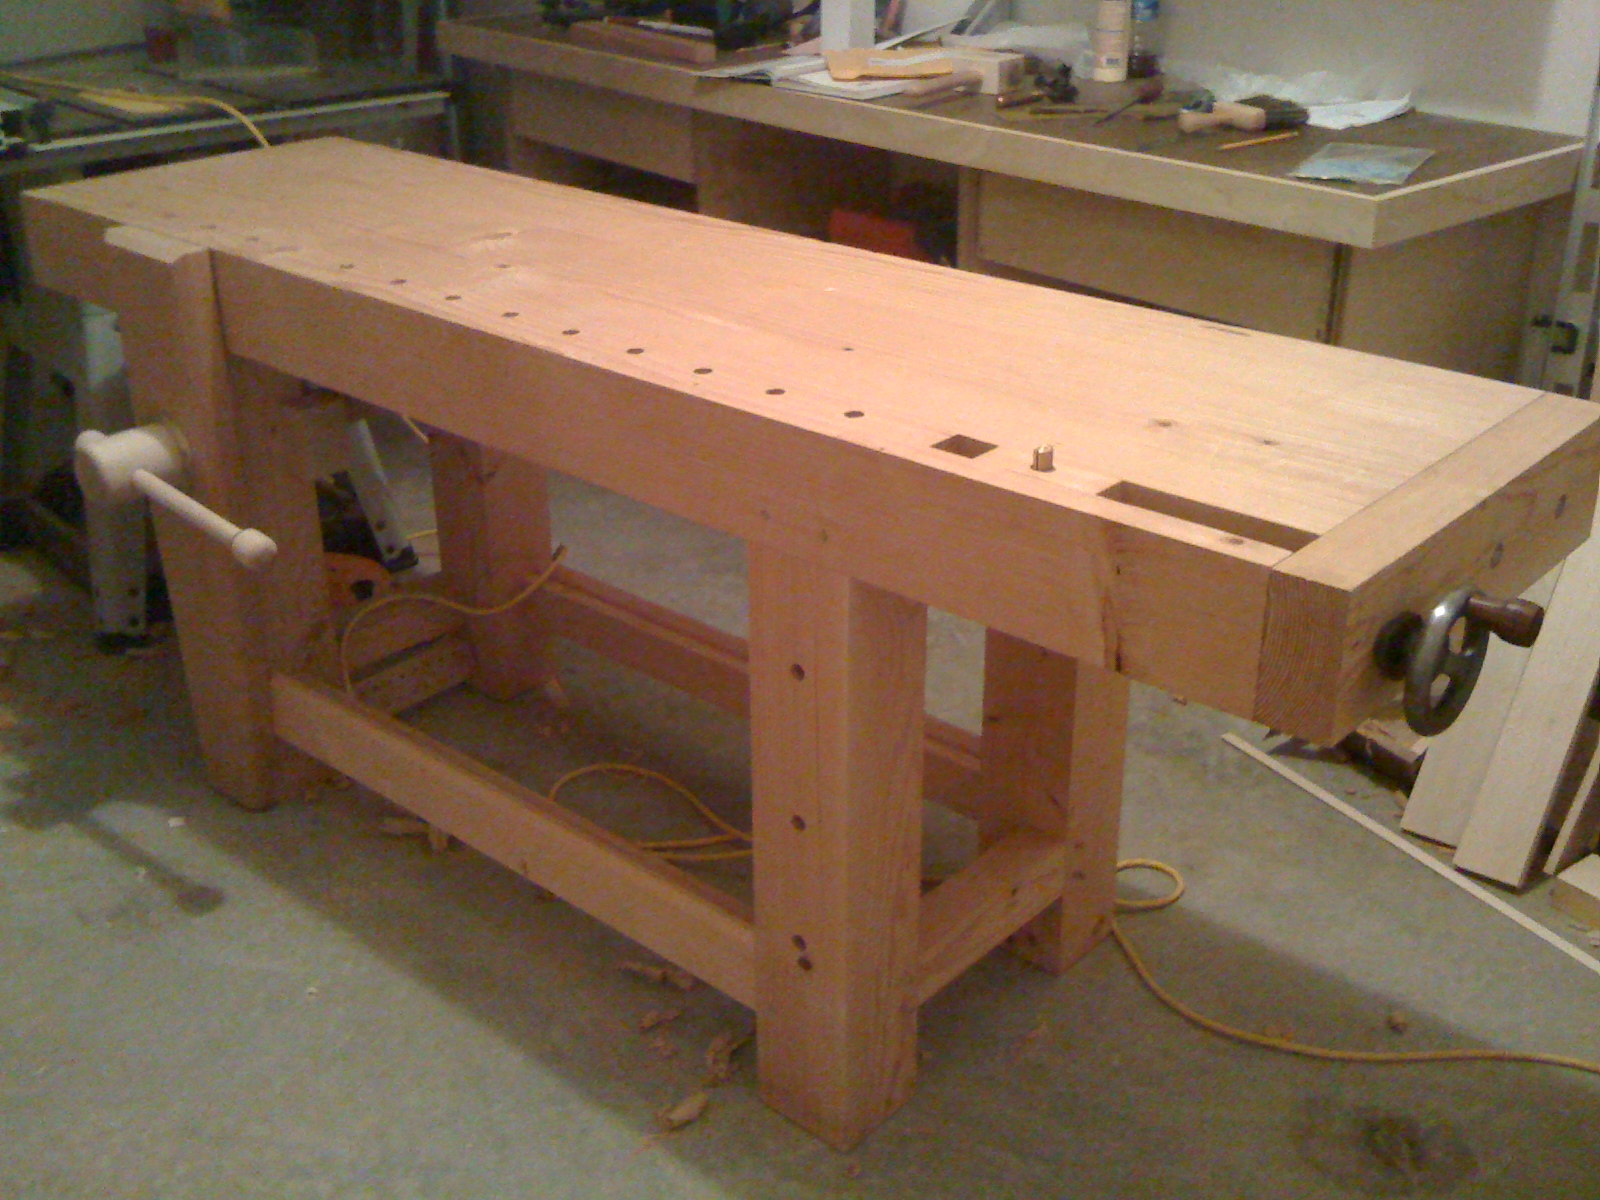 Sjoberg woodworking bench Plans DIY How to Make 